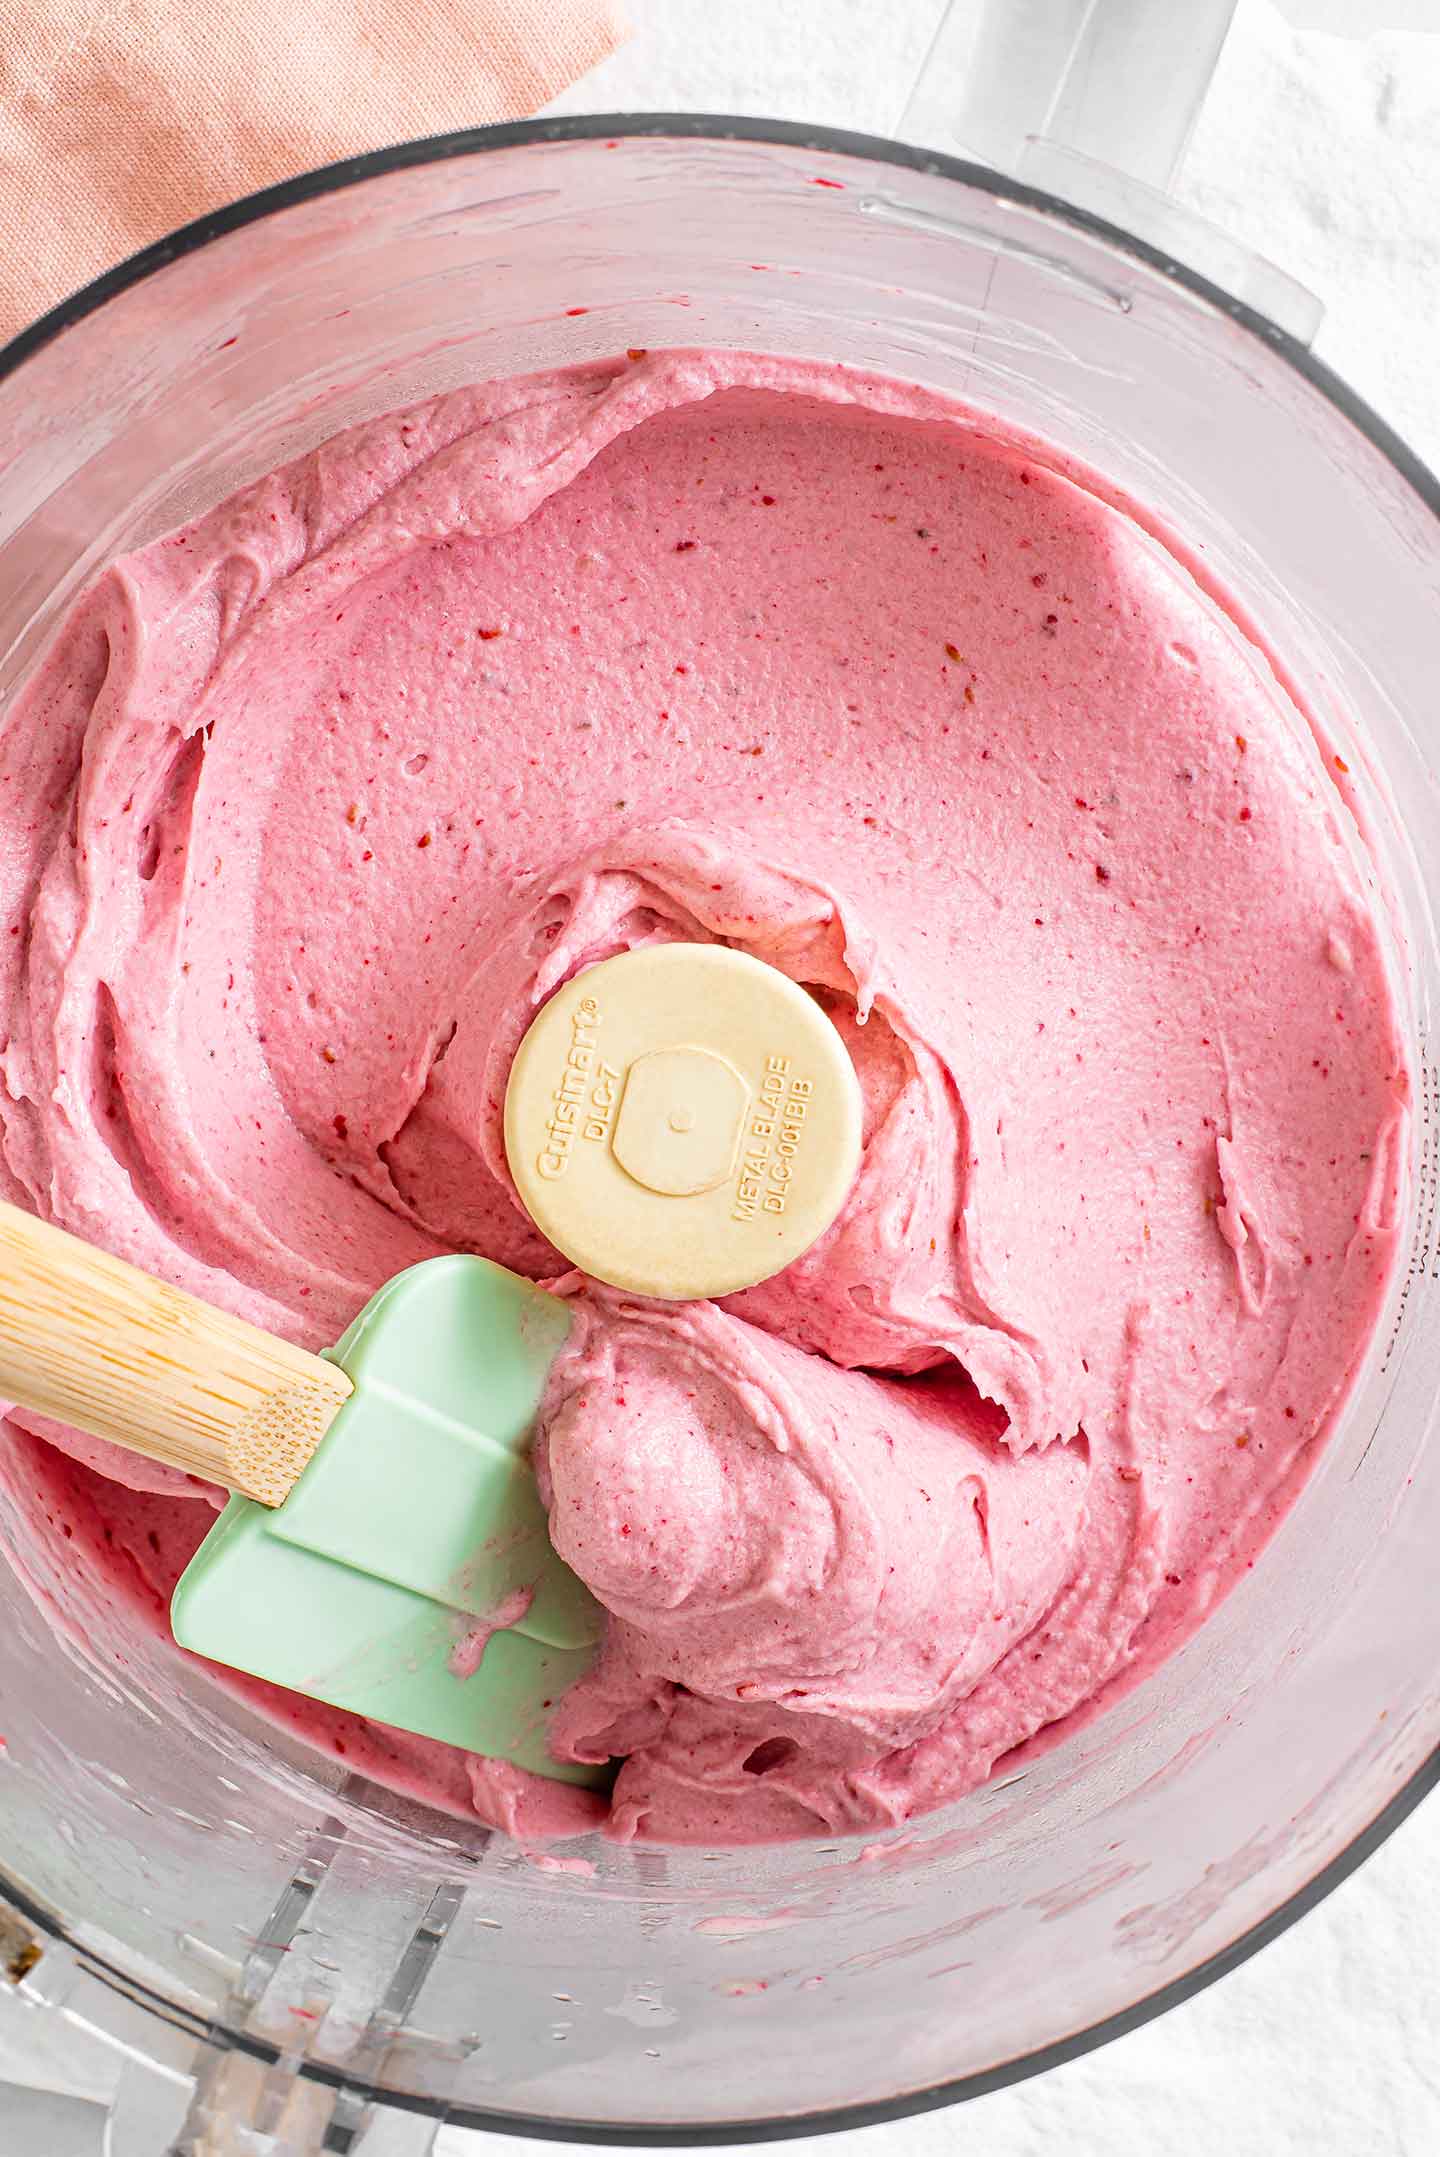 Top down view of bright pink blended raspberry nice cream in a food processor.